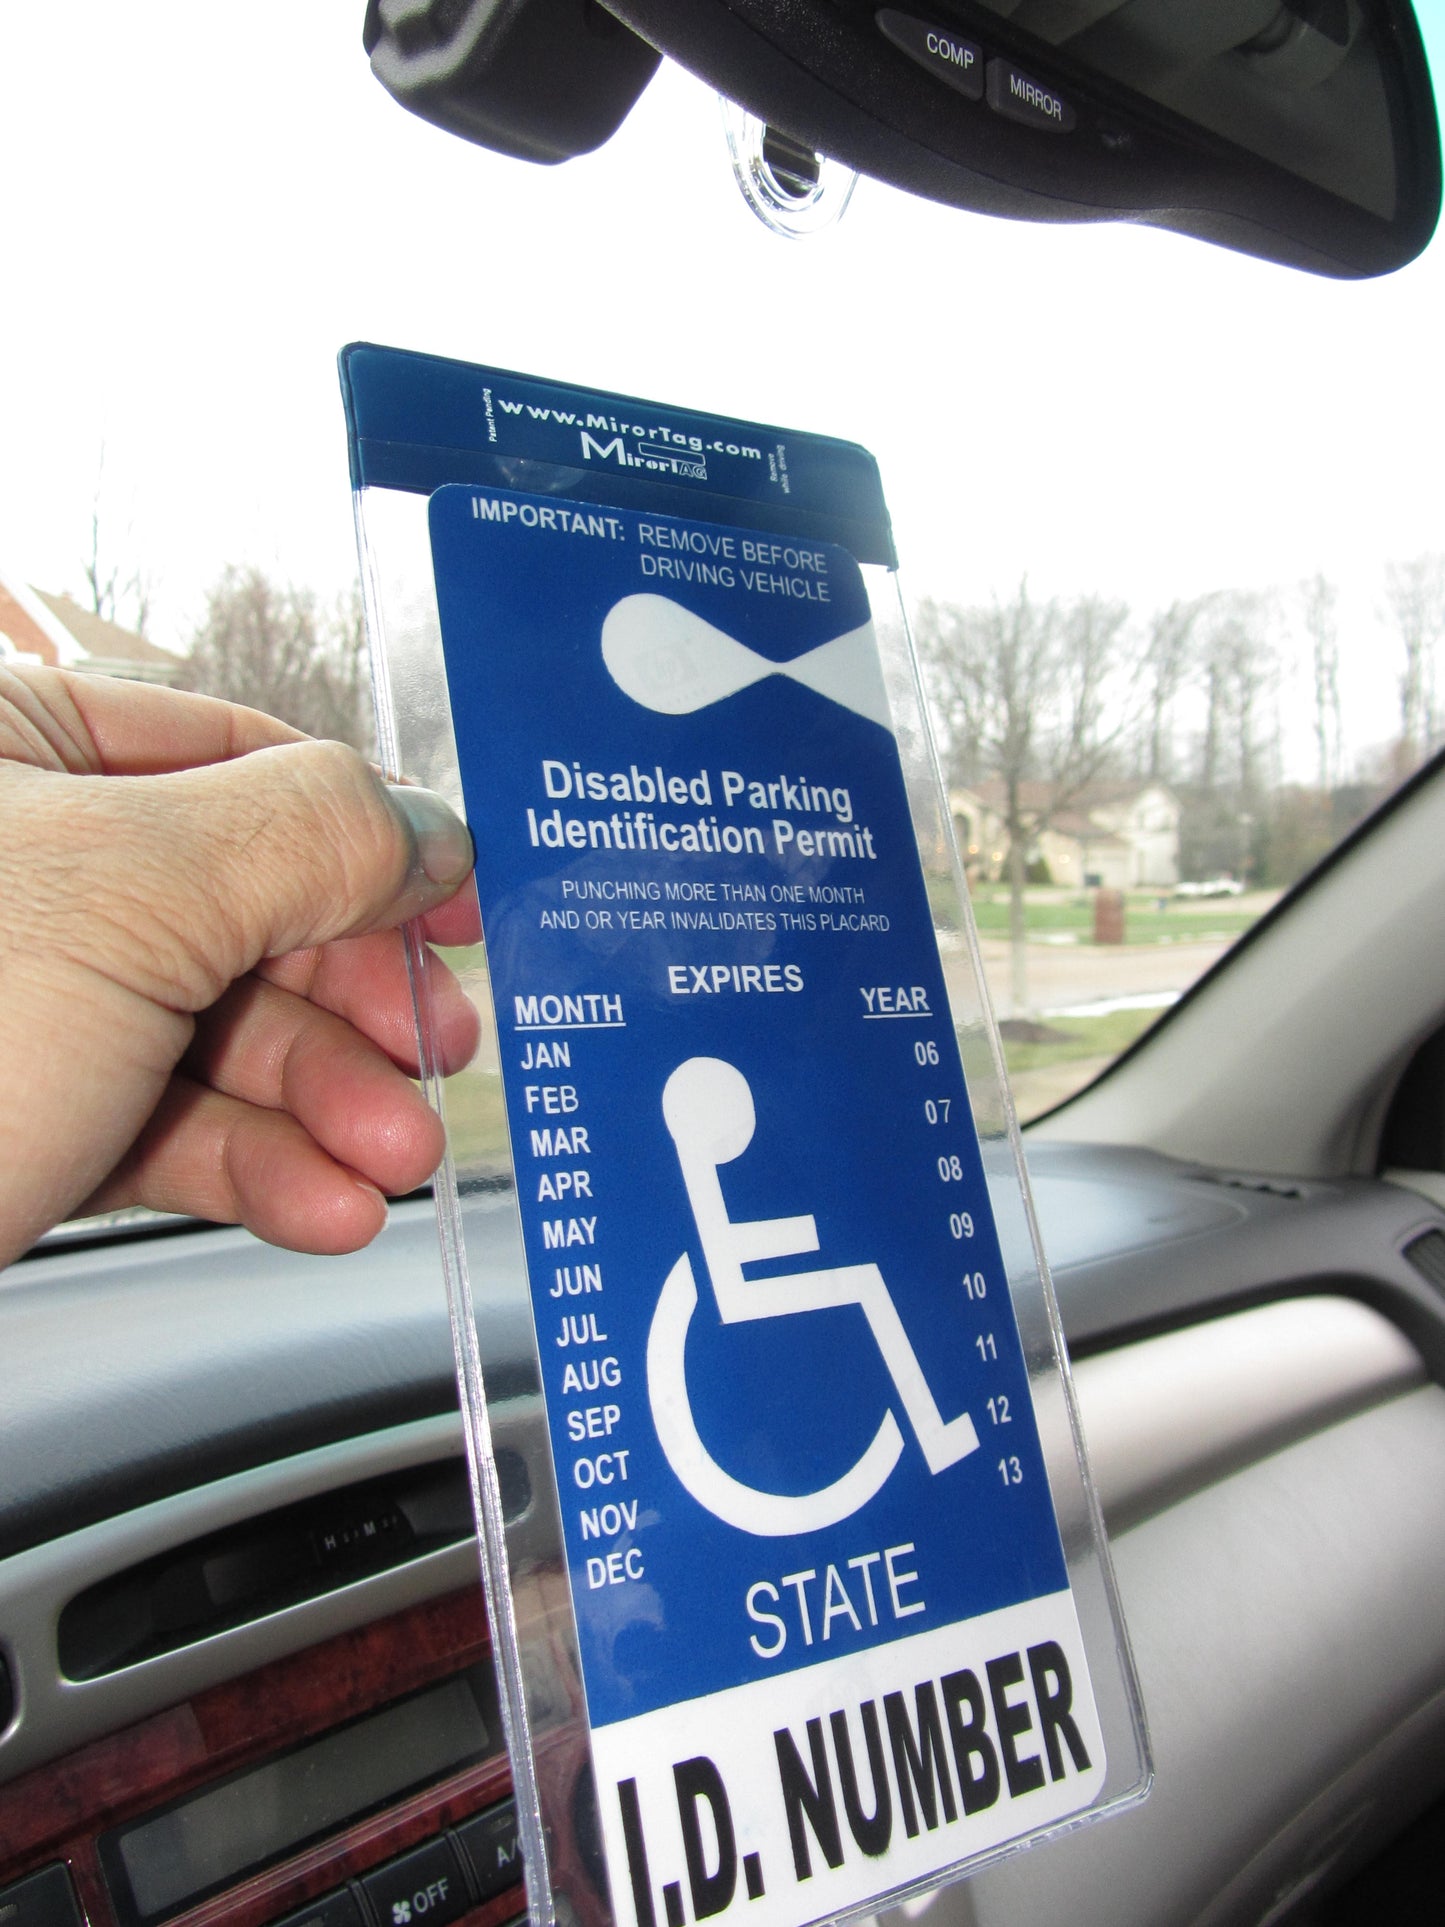 Mirortag Silver™ MTD25 - Handicap Parking Placard holder & Protector for short tags such as Louisiana & Indiana States. Tag size: 7in x 4in. Easy ON and OFF. Made in USA